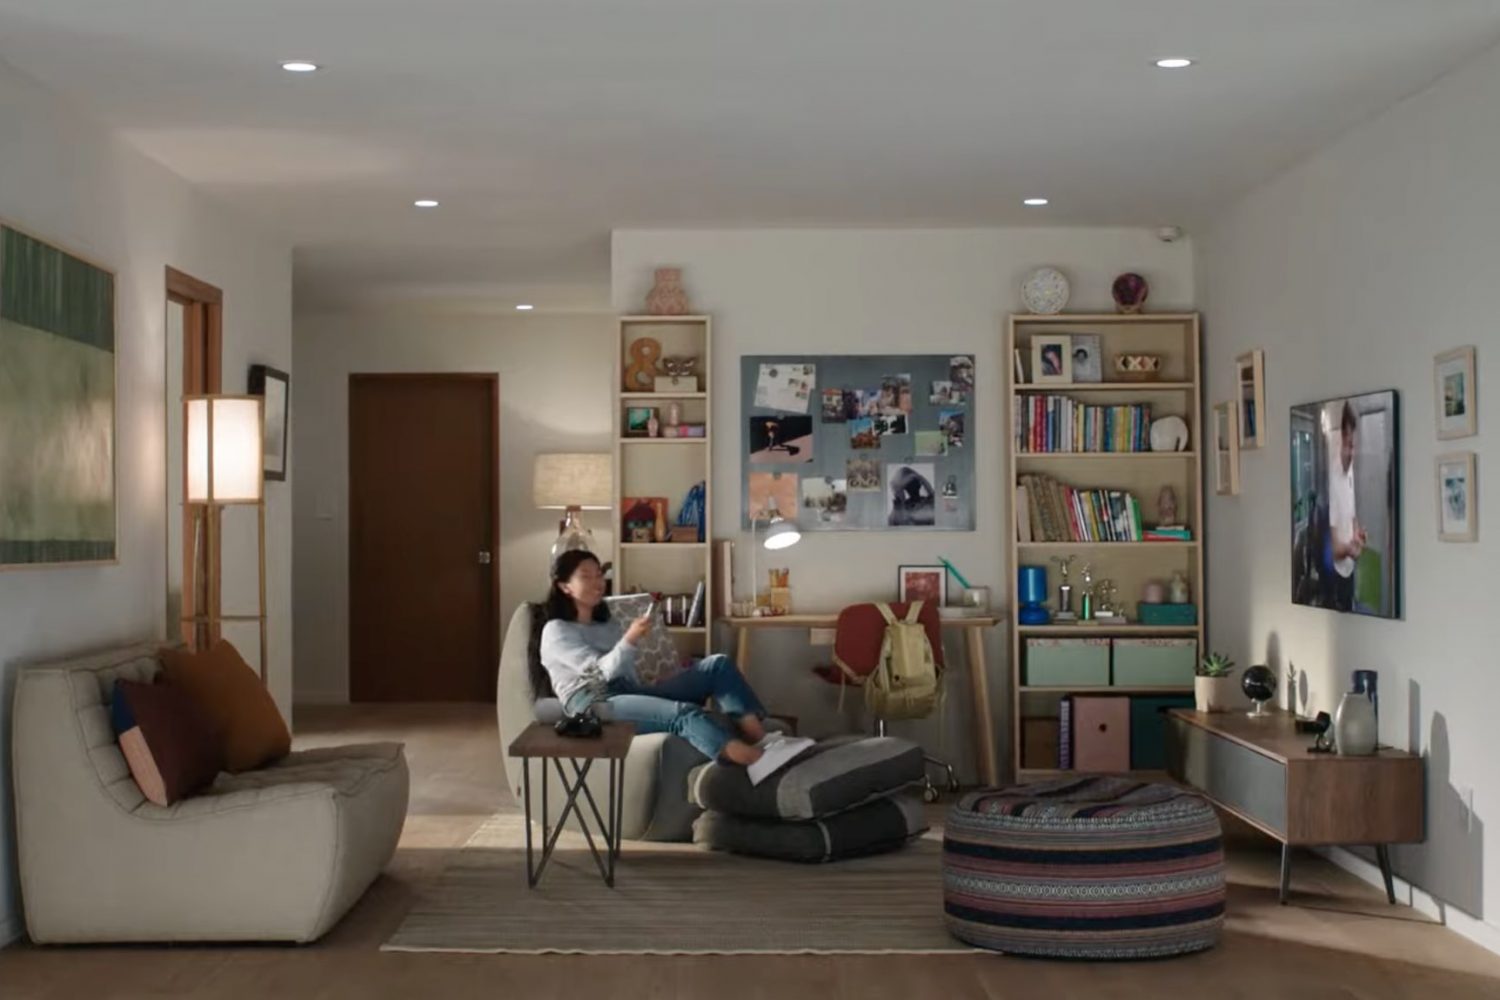 A lifestyle image showing a home featuring a young woman sitting on the couch, smiling and watching Apple TV and holding Siri Remote in her right hand